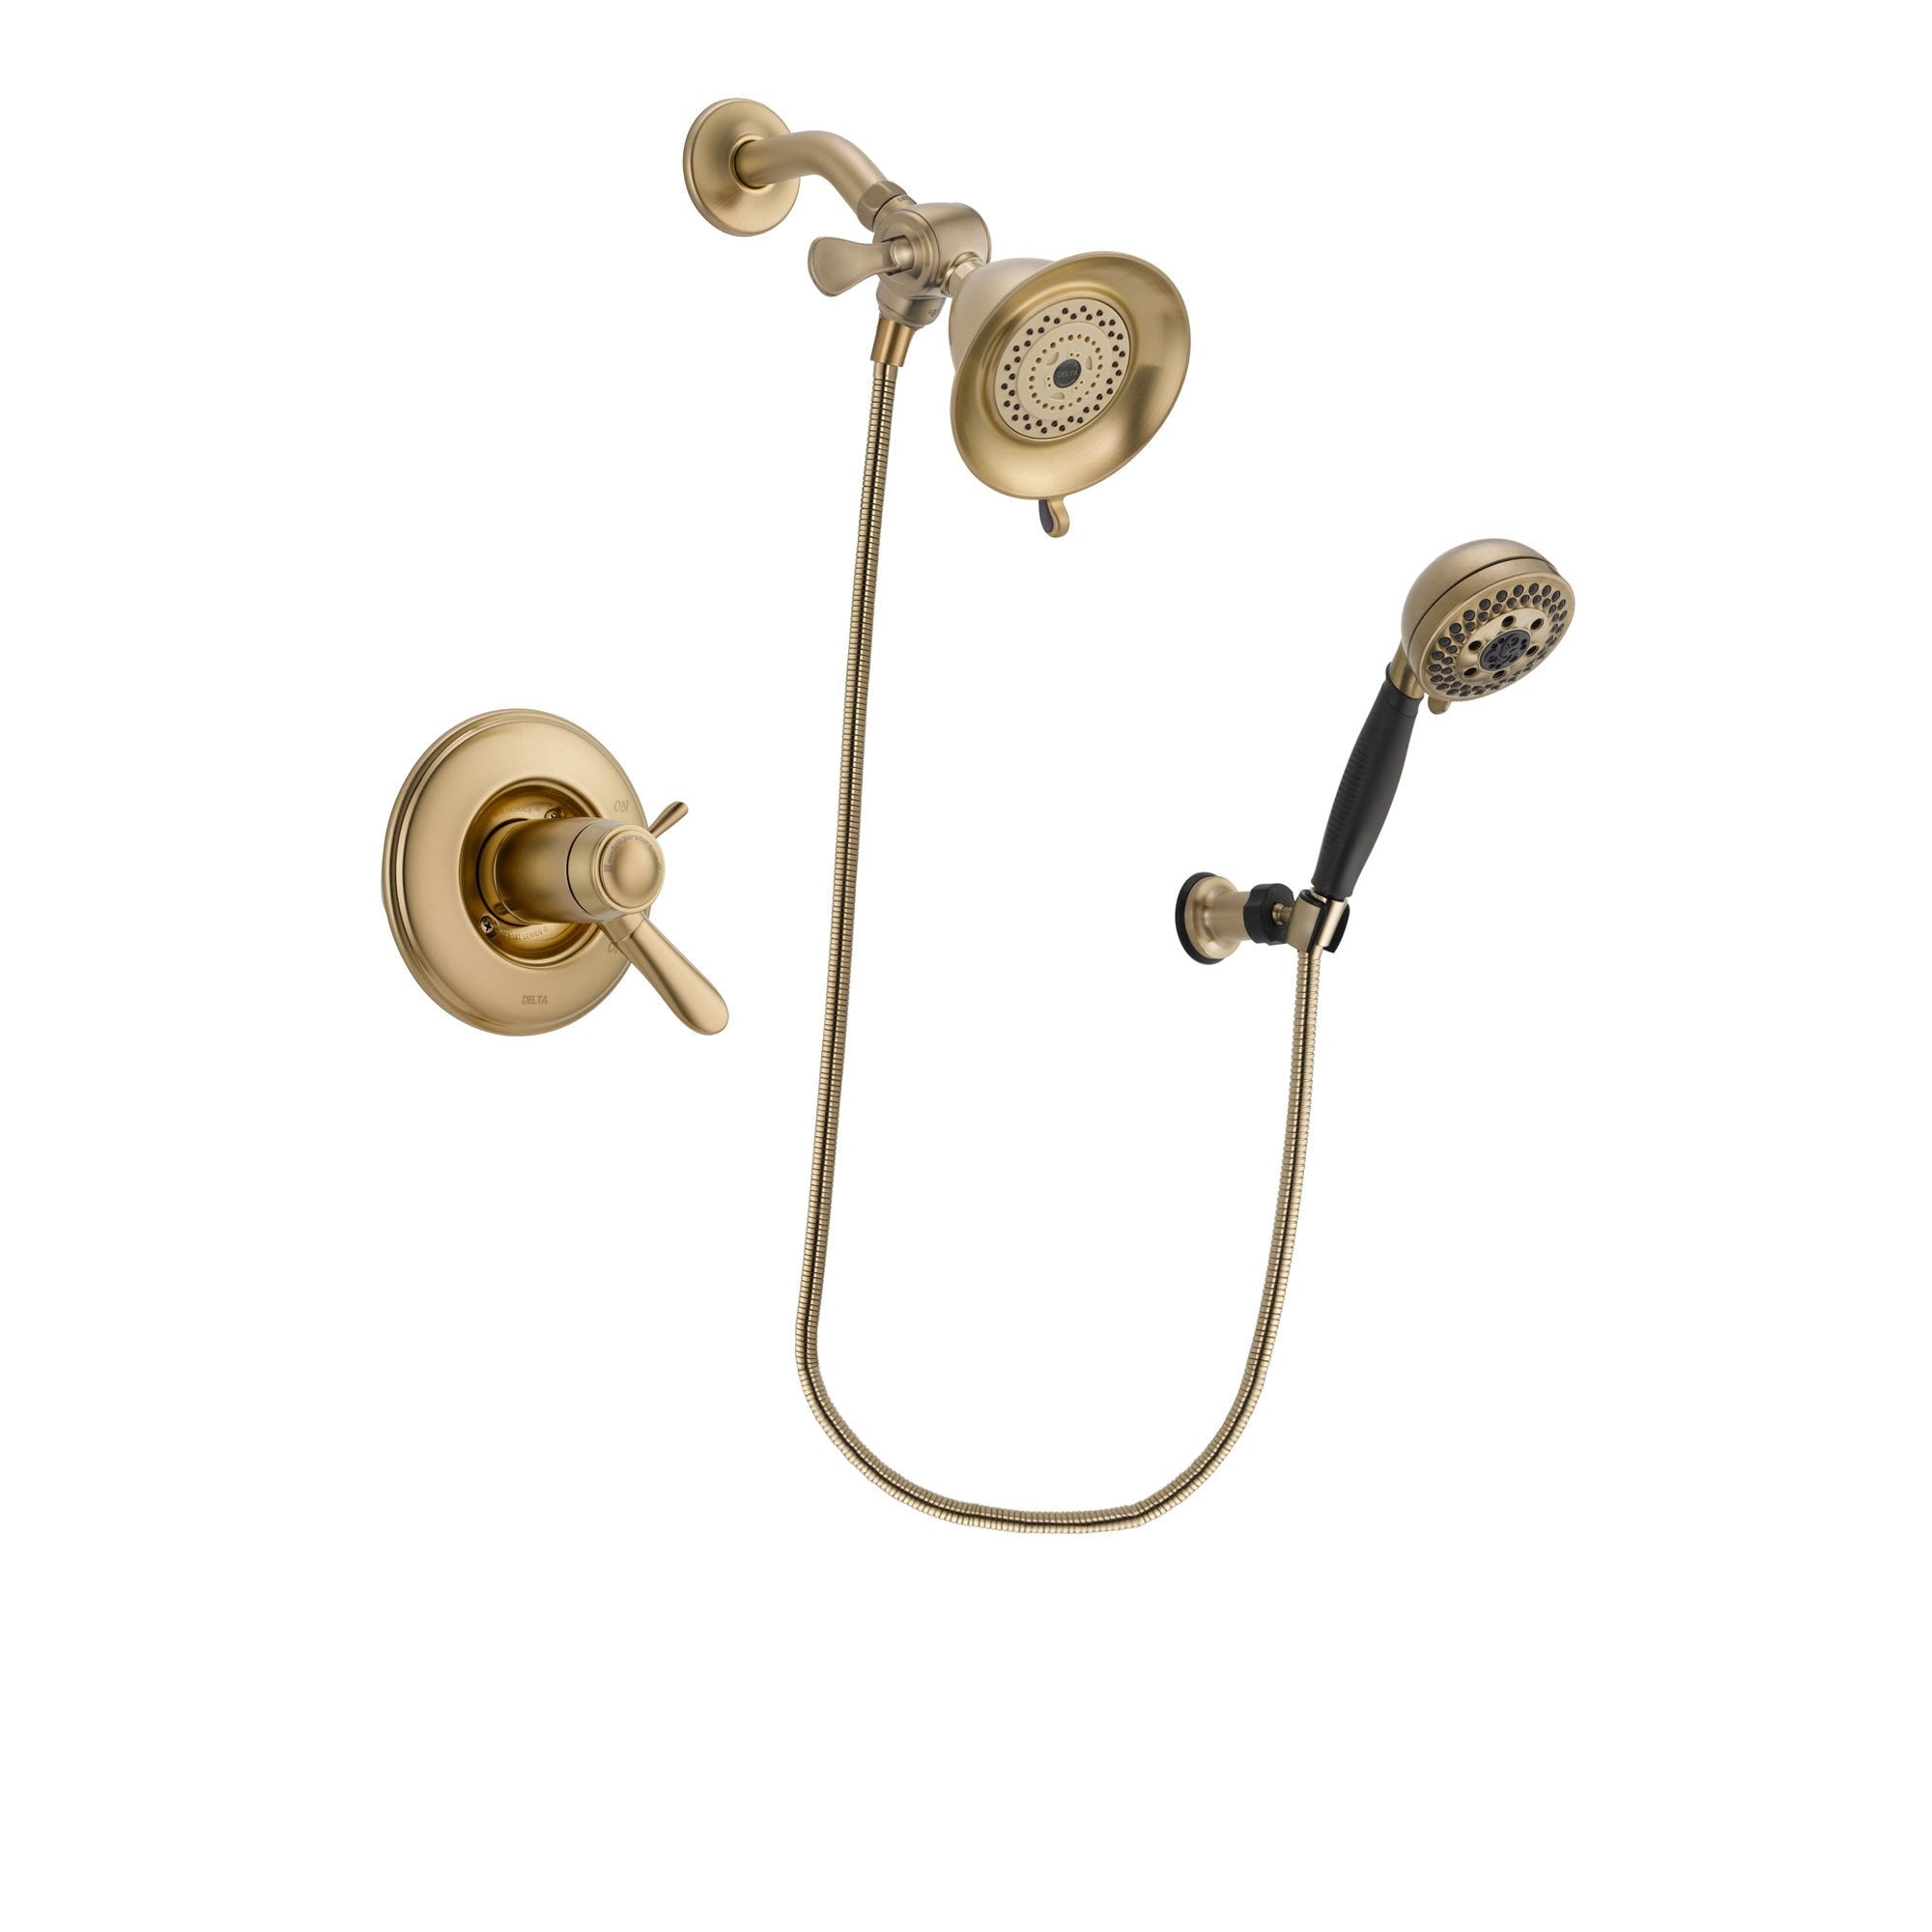 Delta Lahara Champagne Bronze Finish Thermostatic Shower Faucet System Package with Water-Efficient Shower Head and 5-Spray Wall Mount Hand Shower Includes Rough-in Valve DSP3734V